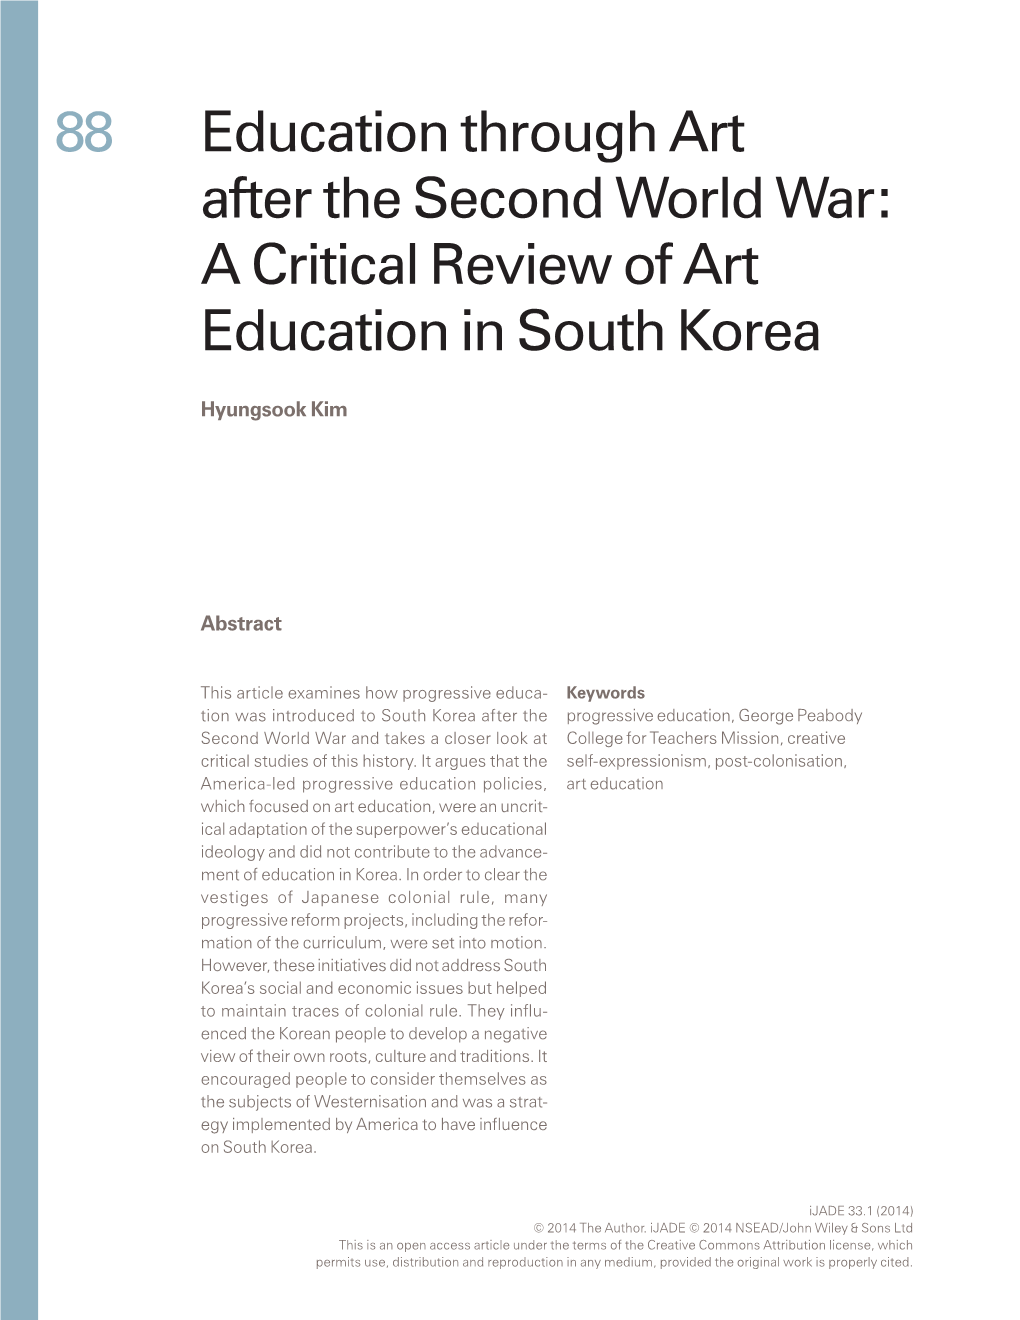 A Critical Review of Art Education in South Korea